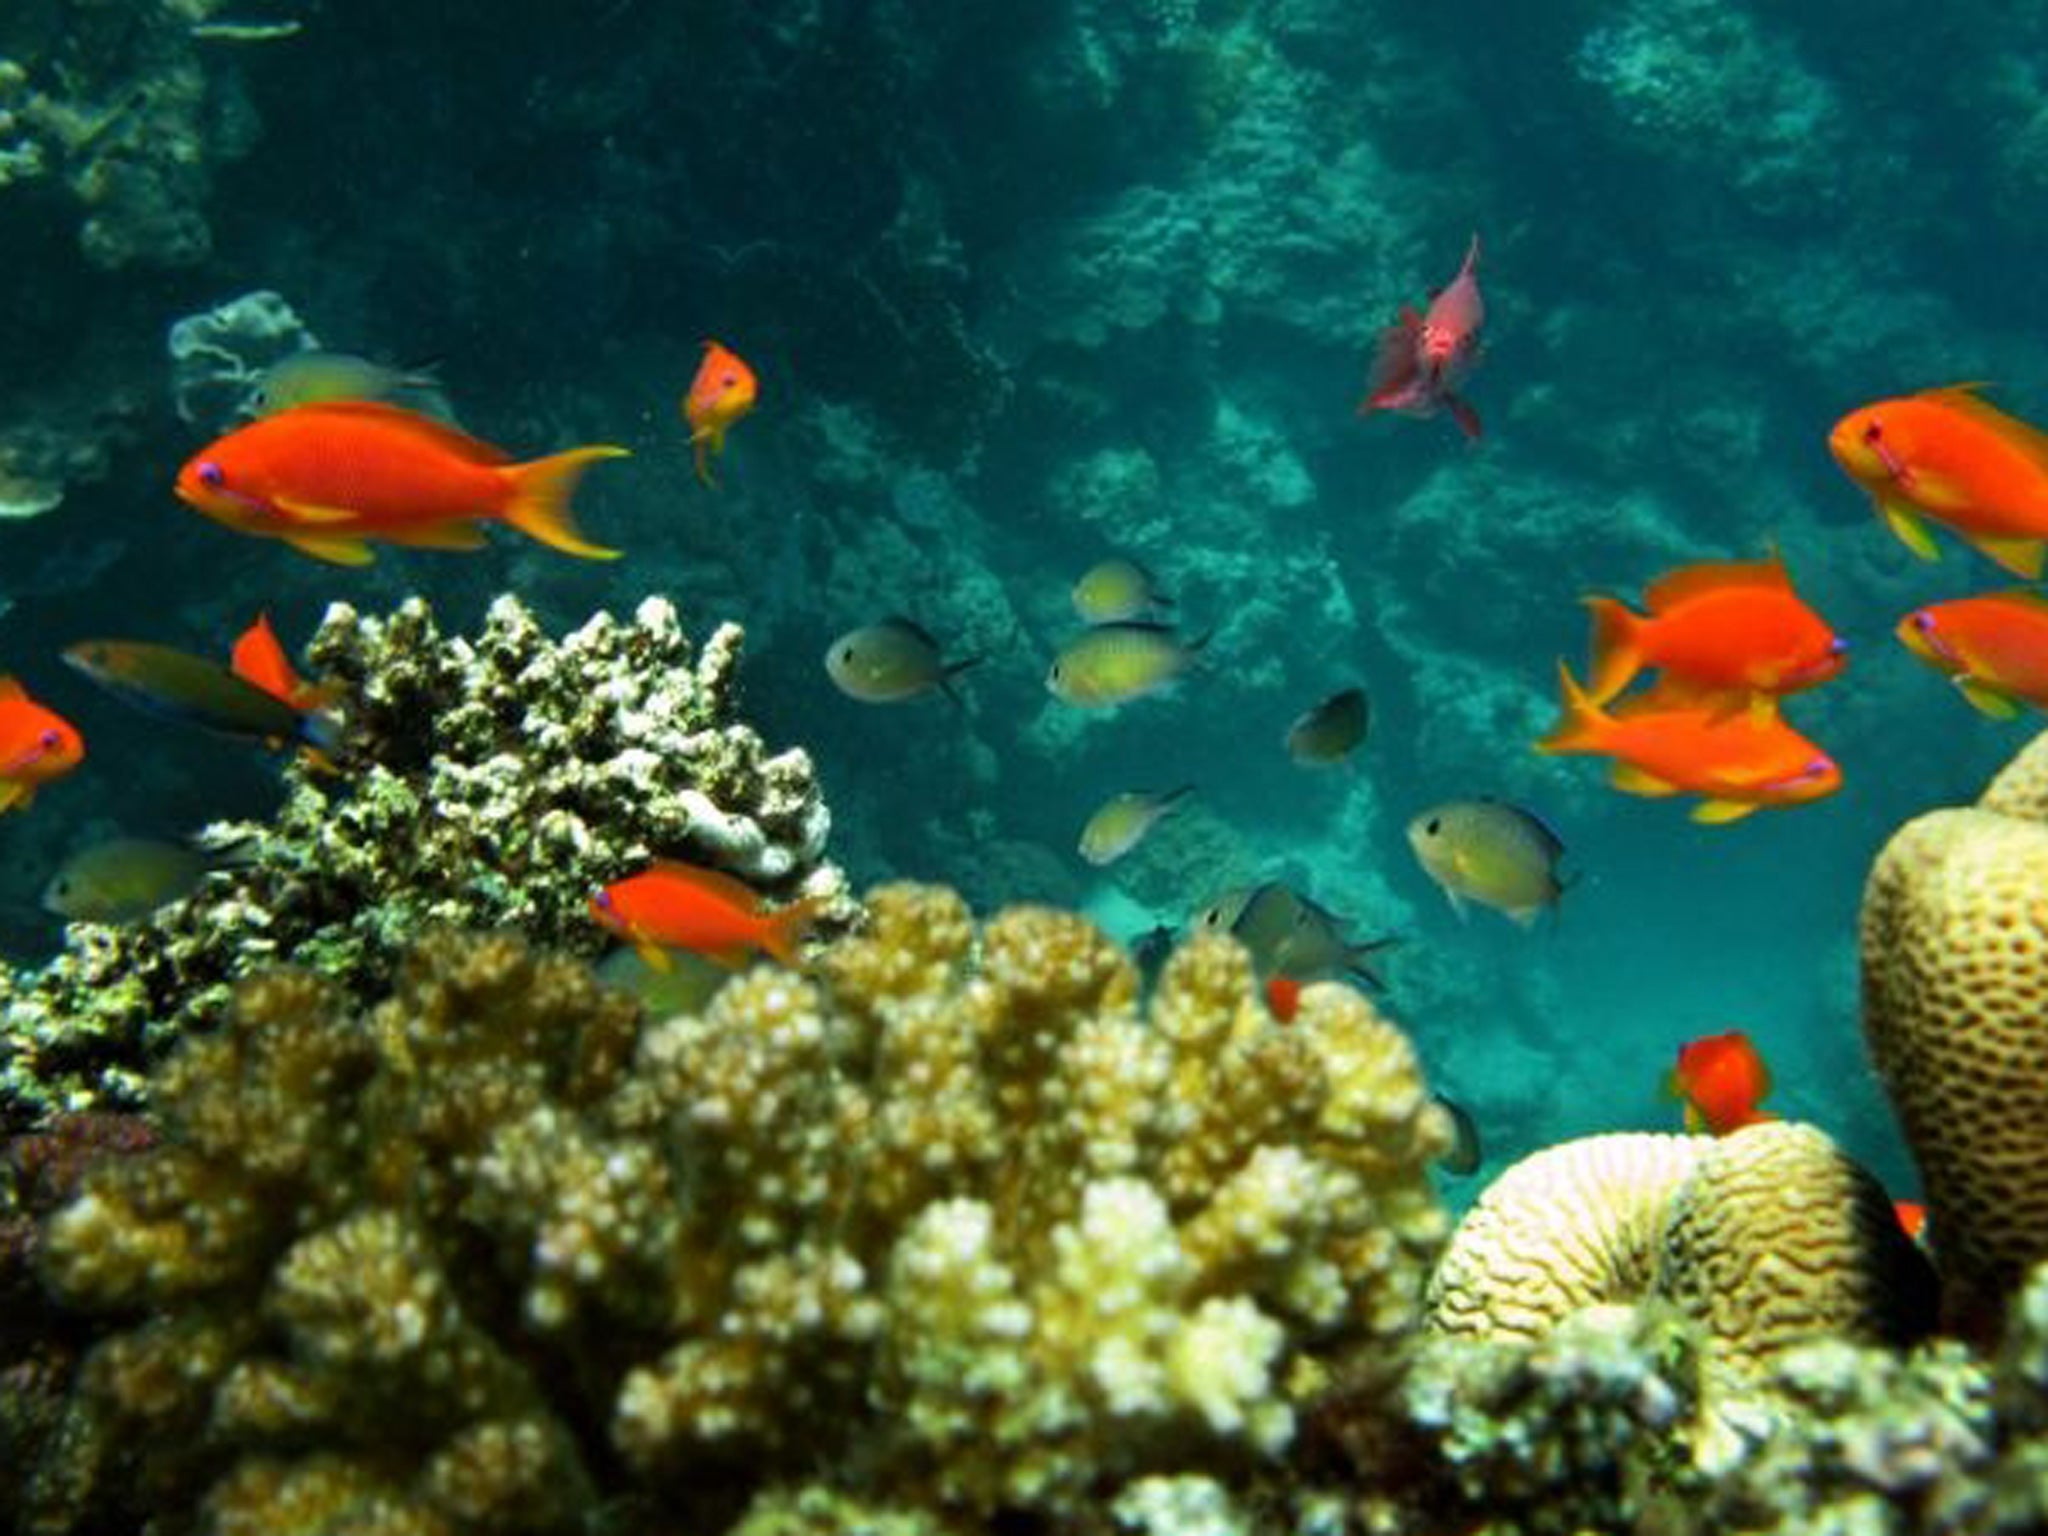 Coral reefs, home to one third of marine species are threatened by ocean acidification and human activities